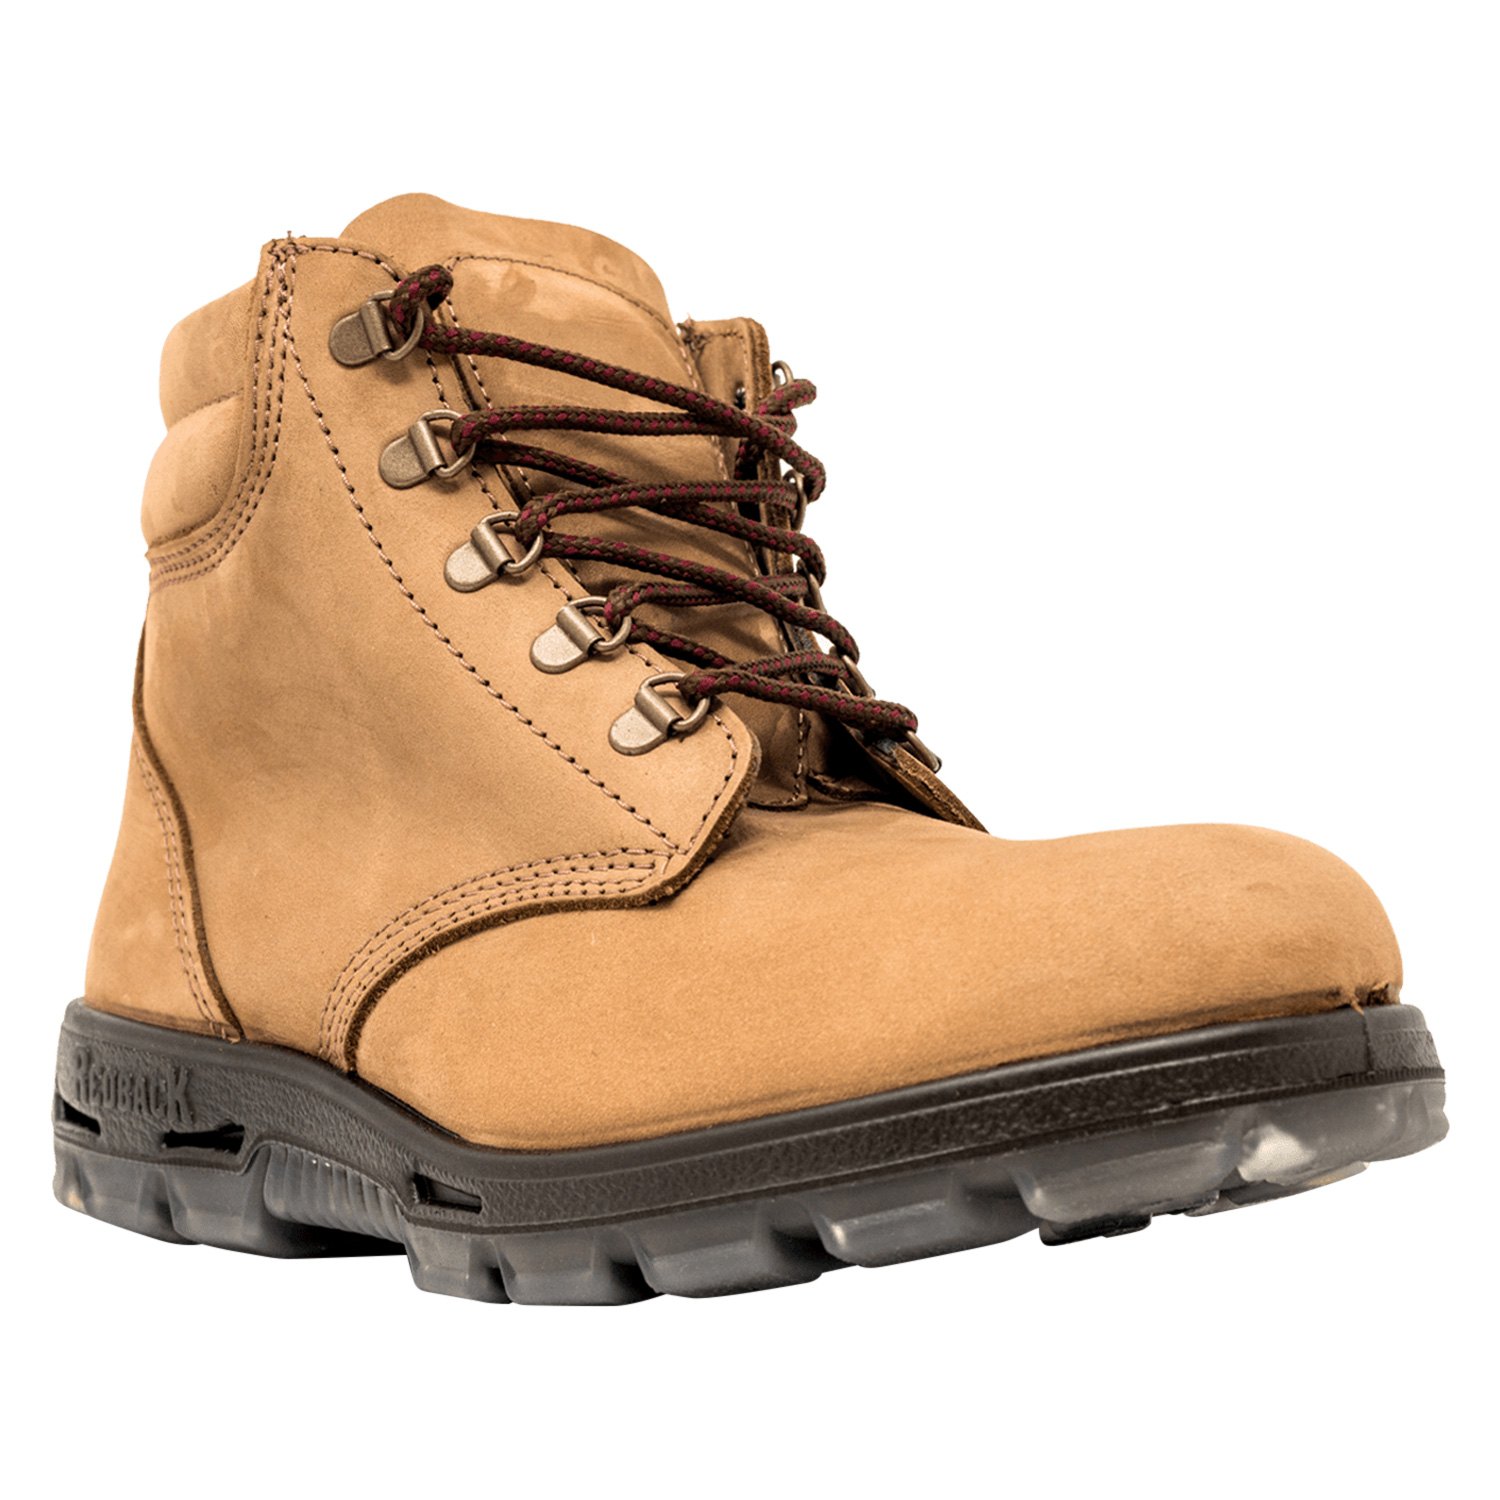 Redback Boots® - Outland™ Boots 